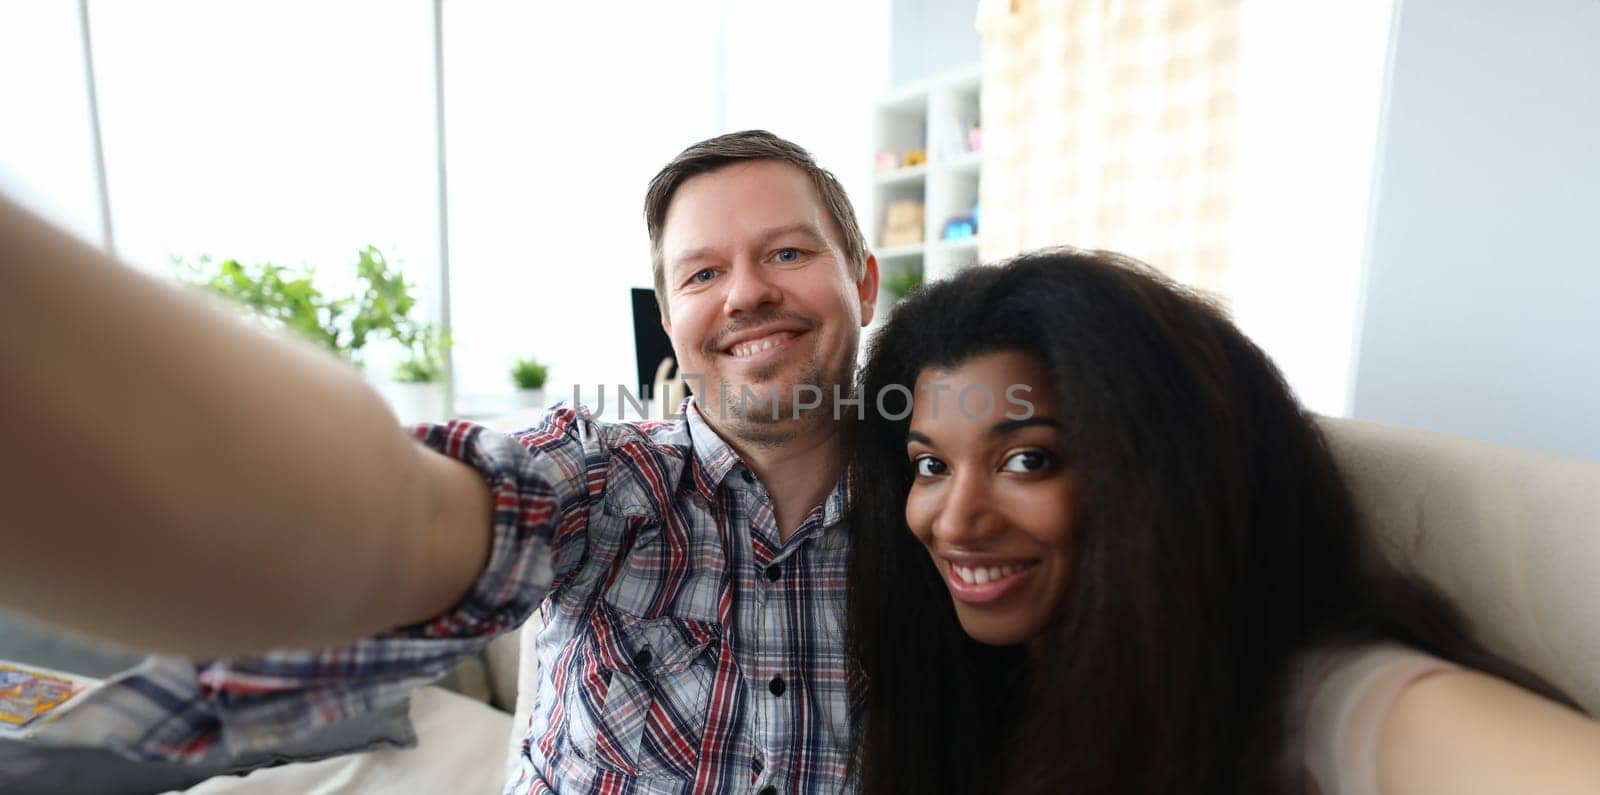 Portrait of sweet couple making selfie on smartphone. Smiling man and afro-american woman. Spouse in good mood. Relationship and leisure fun time together concept